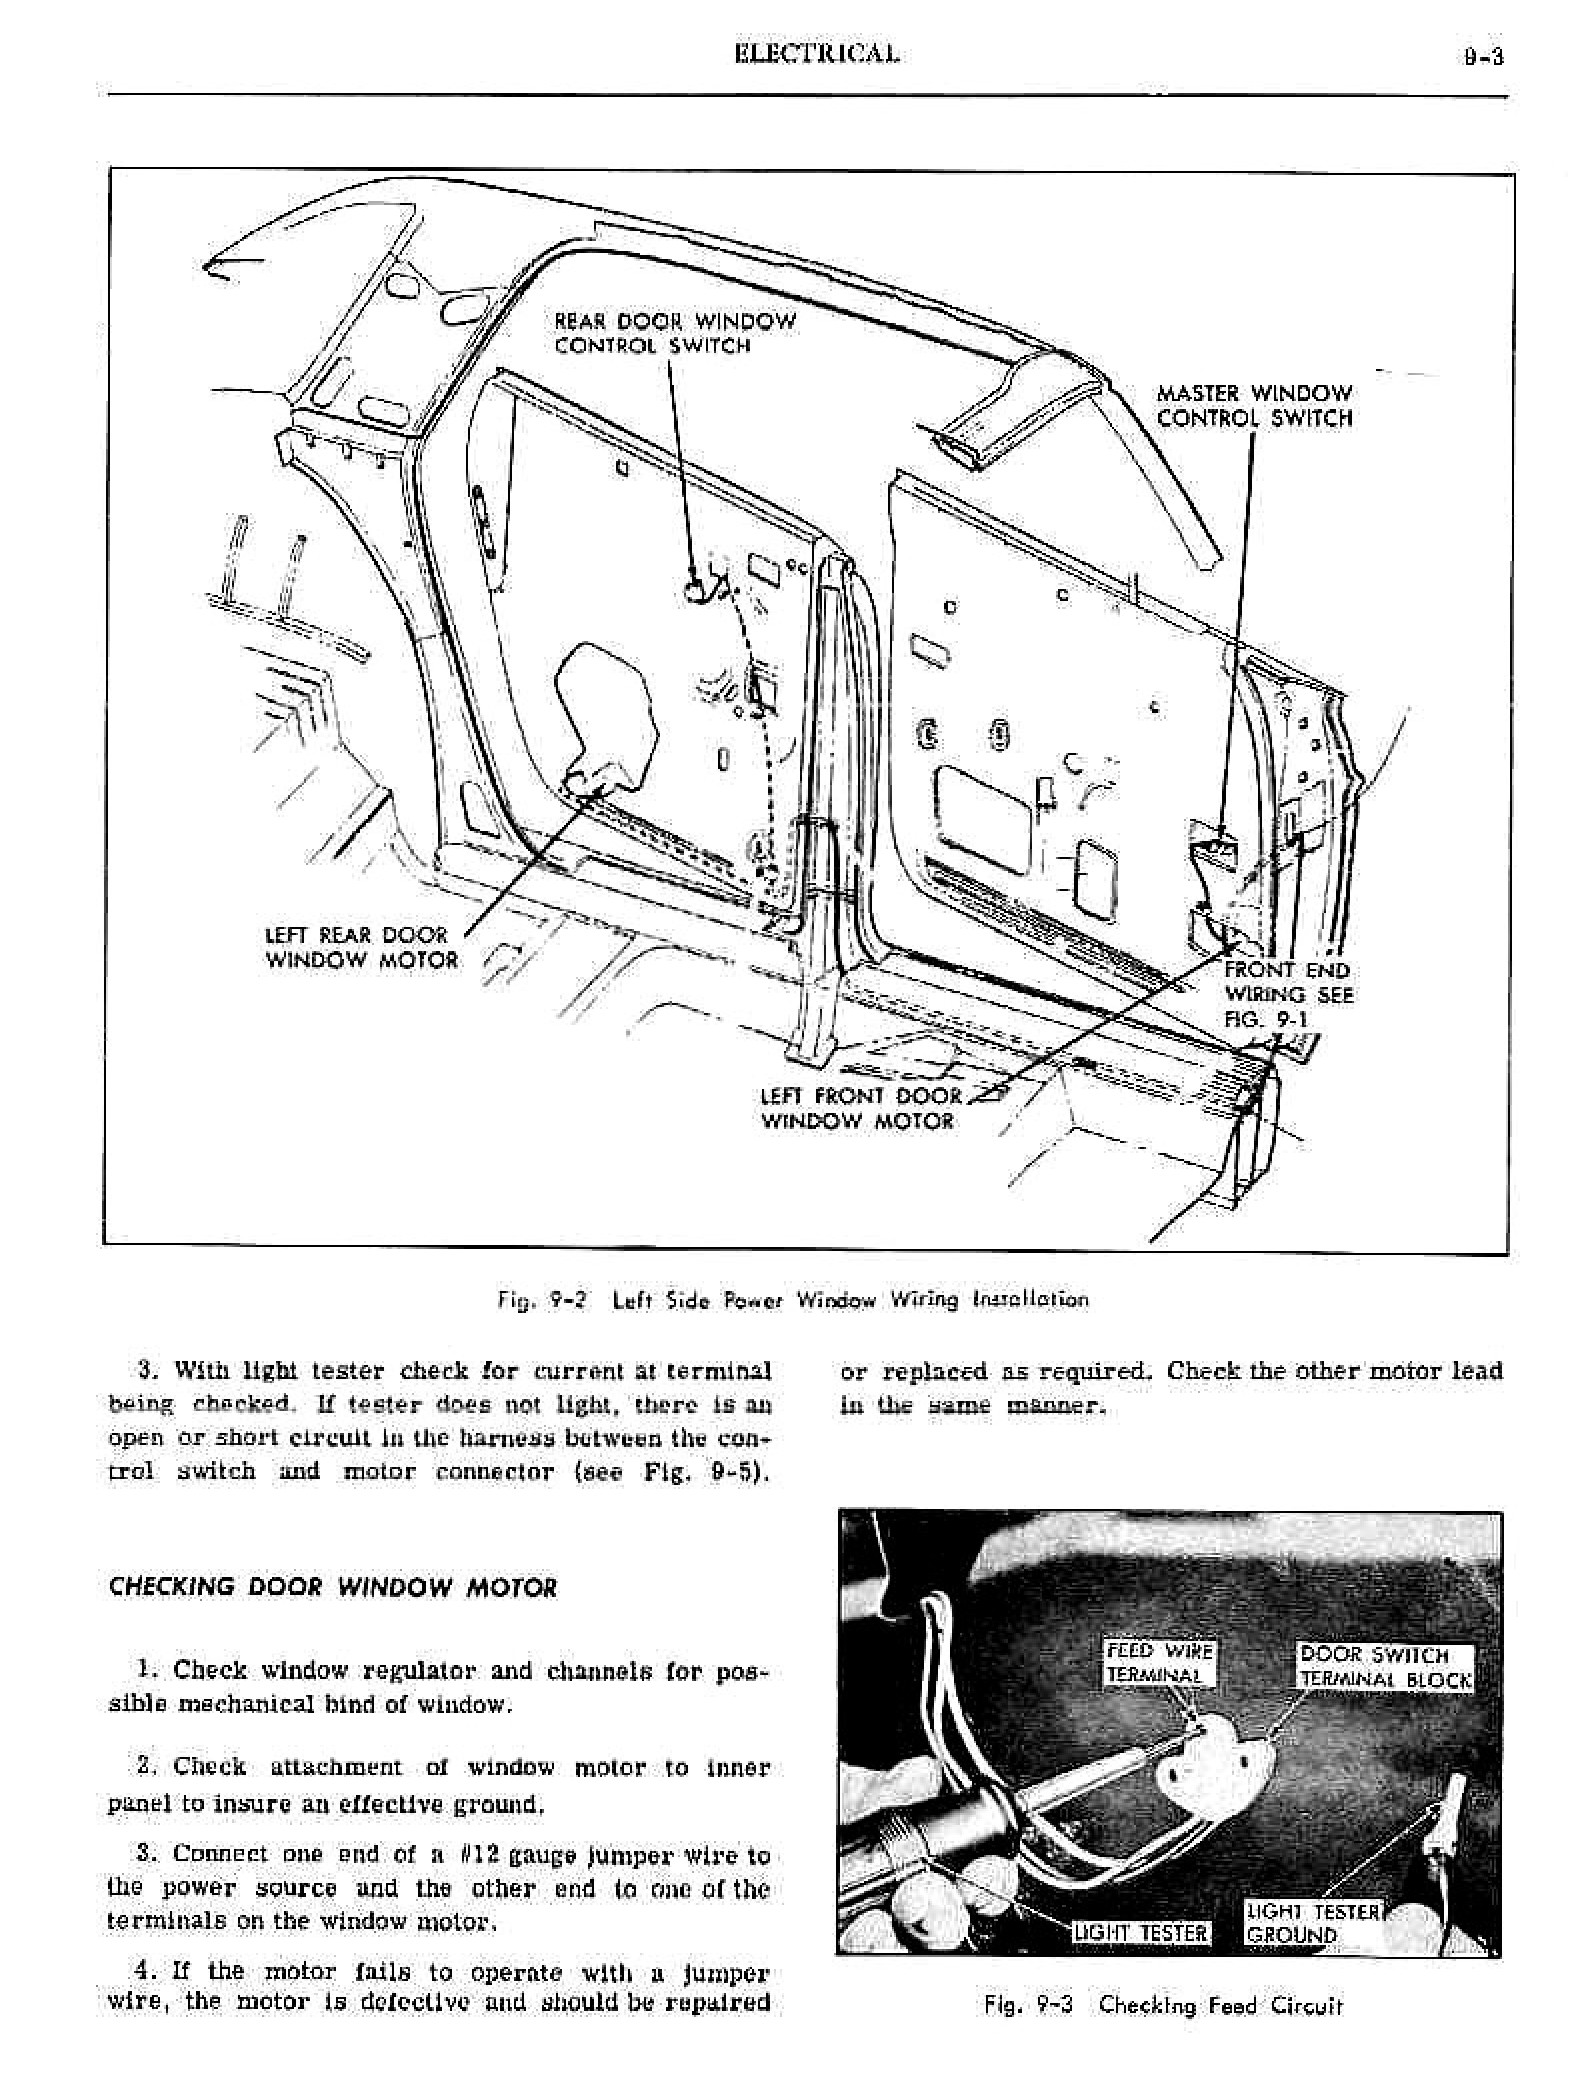 1962 Pontiac Shop Manual- Electrical Page 3 of 21